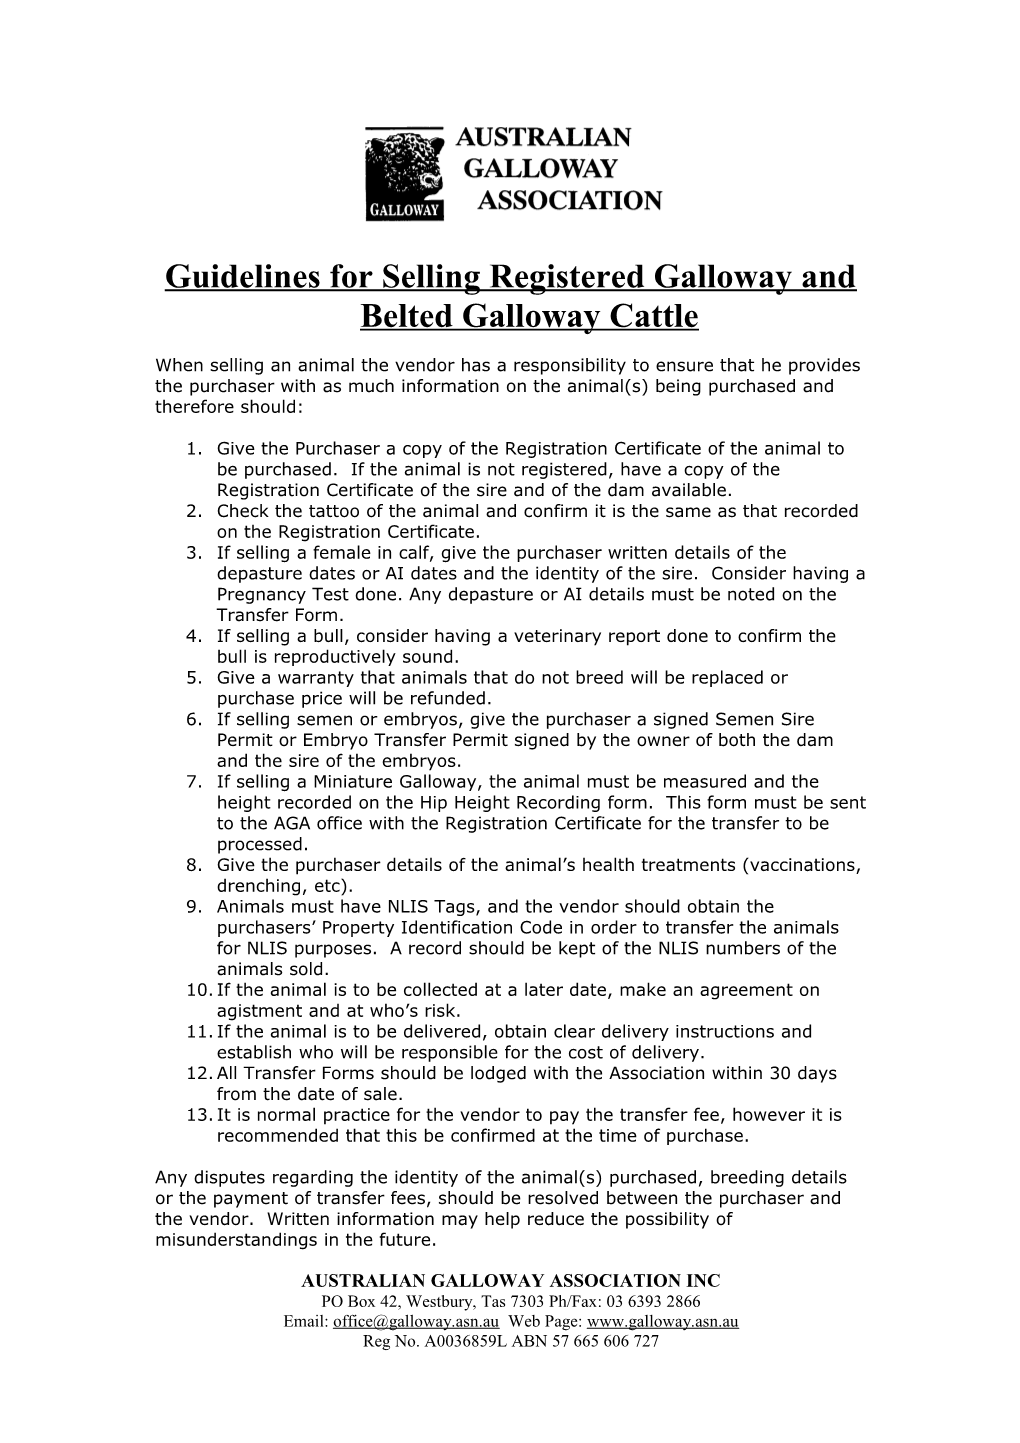 Guidelines for Selling Registered Galloway and Belted Galloway Cattle